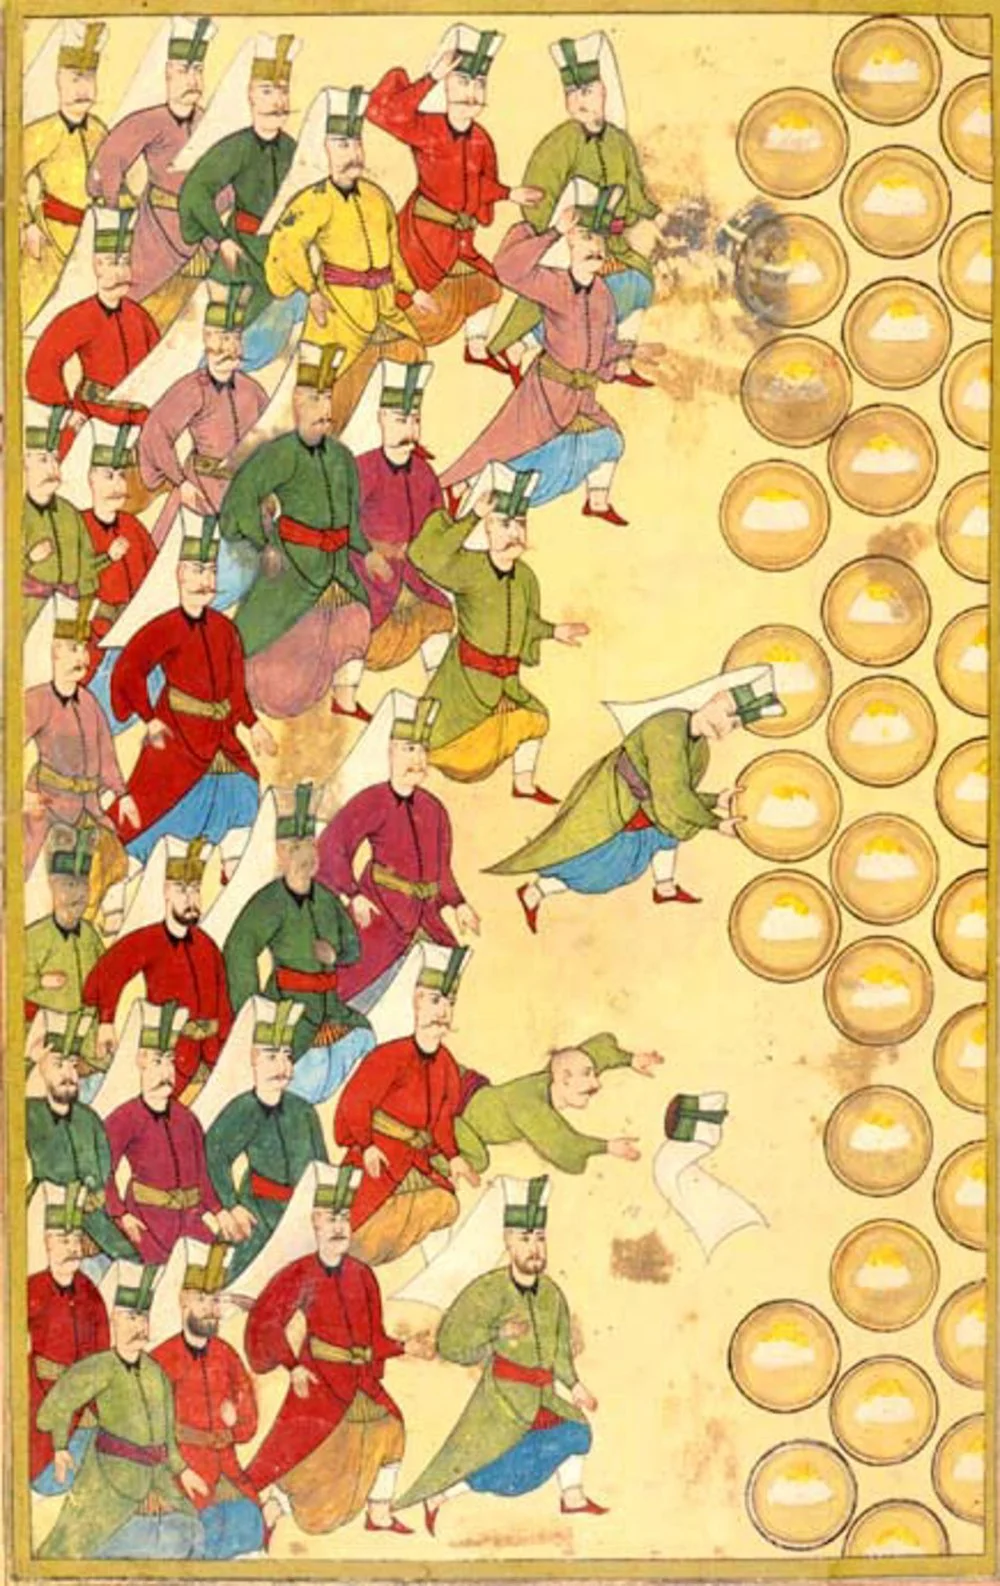 Banquet (Safranpilav) for the Janissaries, given by the Sultan. If they refused the meal, they signaled their disapproval of the Sultan. In this case they accept the meal. Ottoman miniature painting, from the 'Surname-I Vehbi' (Fol. 22b). Topkapı Sarayı Müzesi, Istanbul. 1720/Alamy